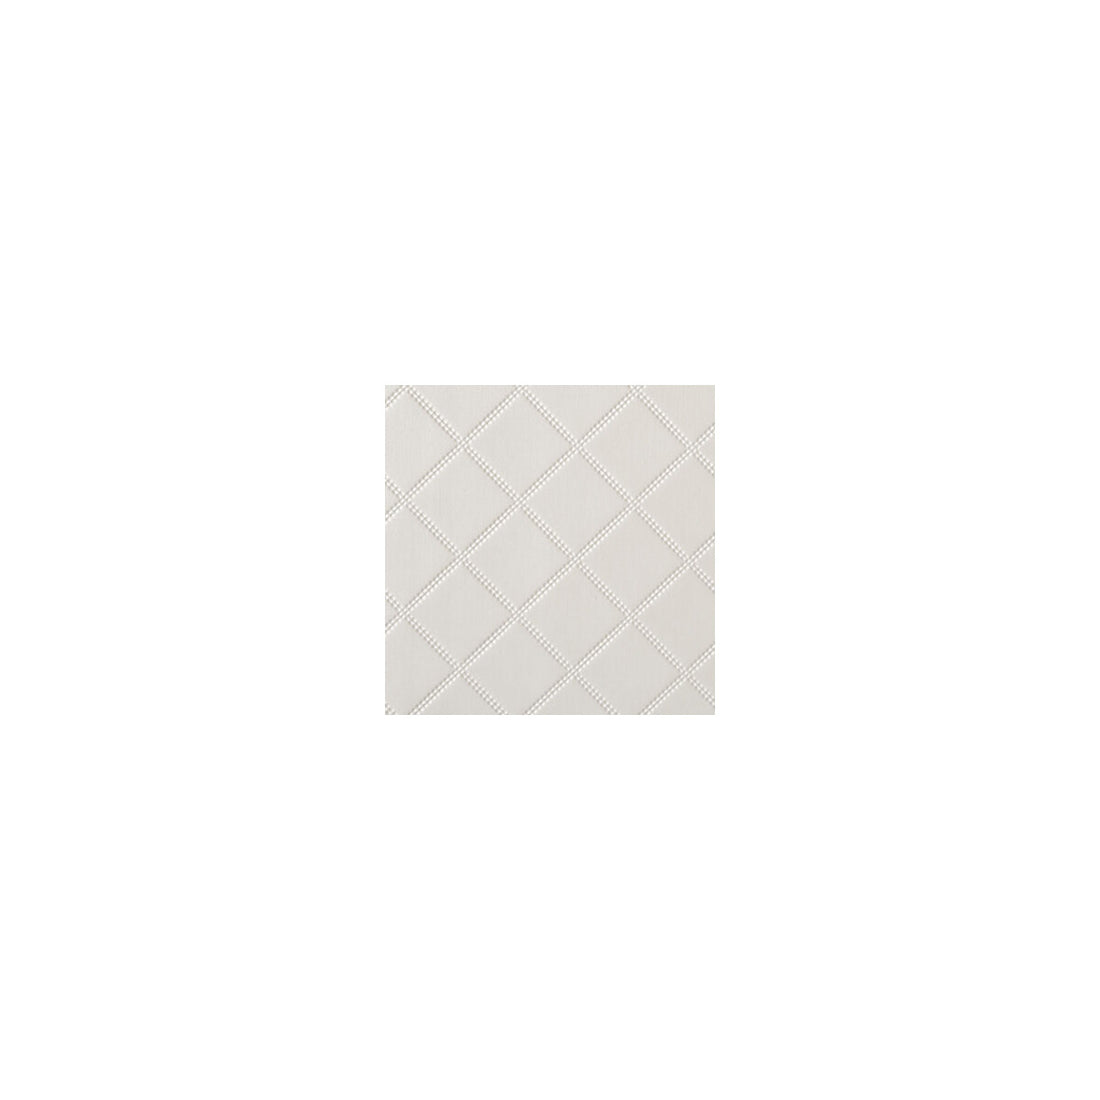 Dream On fabric in white satin color - pattern DREAM ON.1.0 - by Kravet Contract in the Sta-Kleen collection